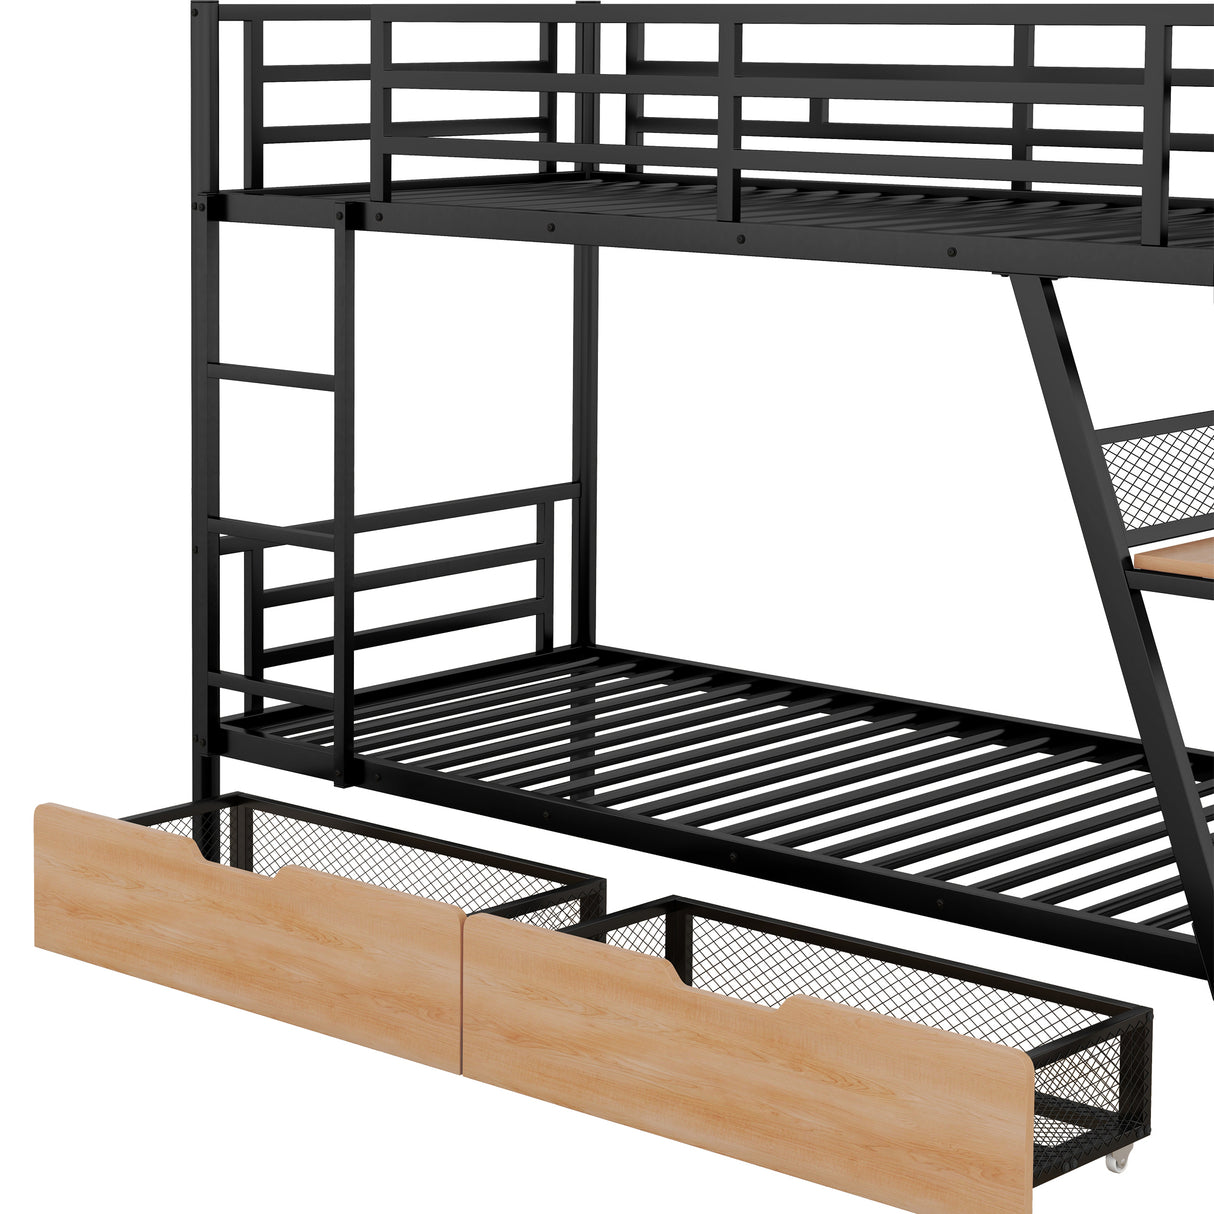 Twin Size Metal Bunk Bed with Built-in Desk, Light and 2 Drawers, Black(Expected Arrival Time: 9.18)